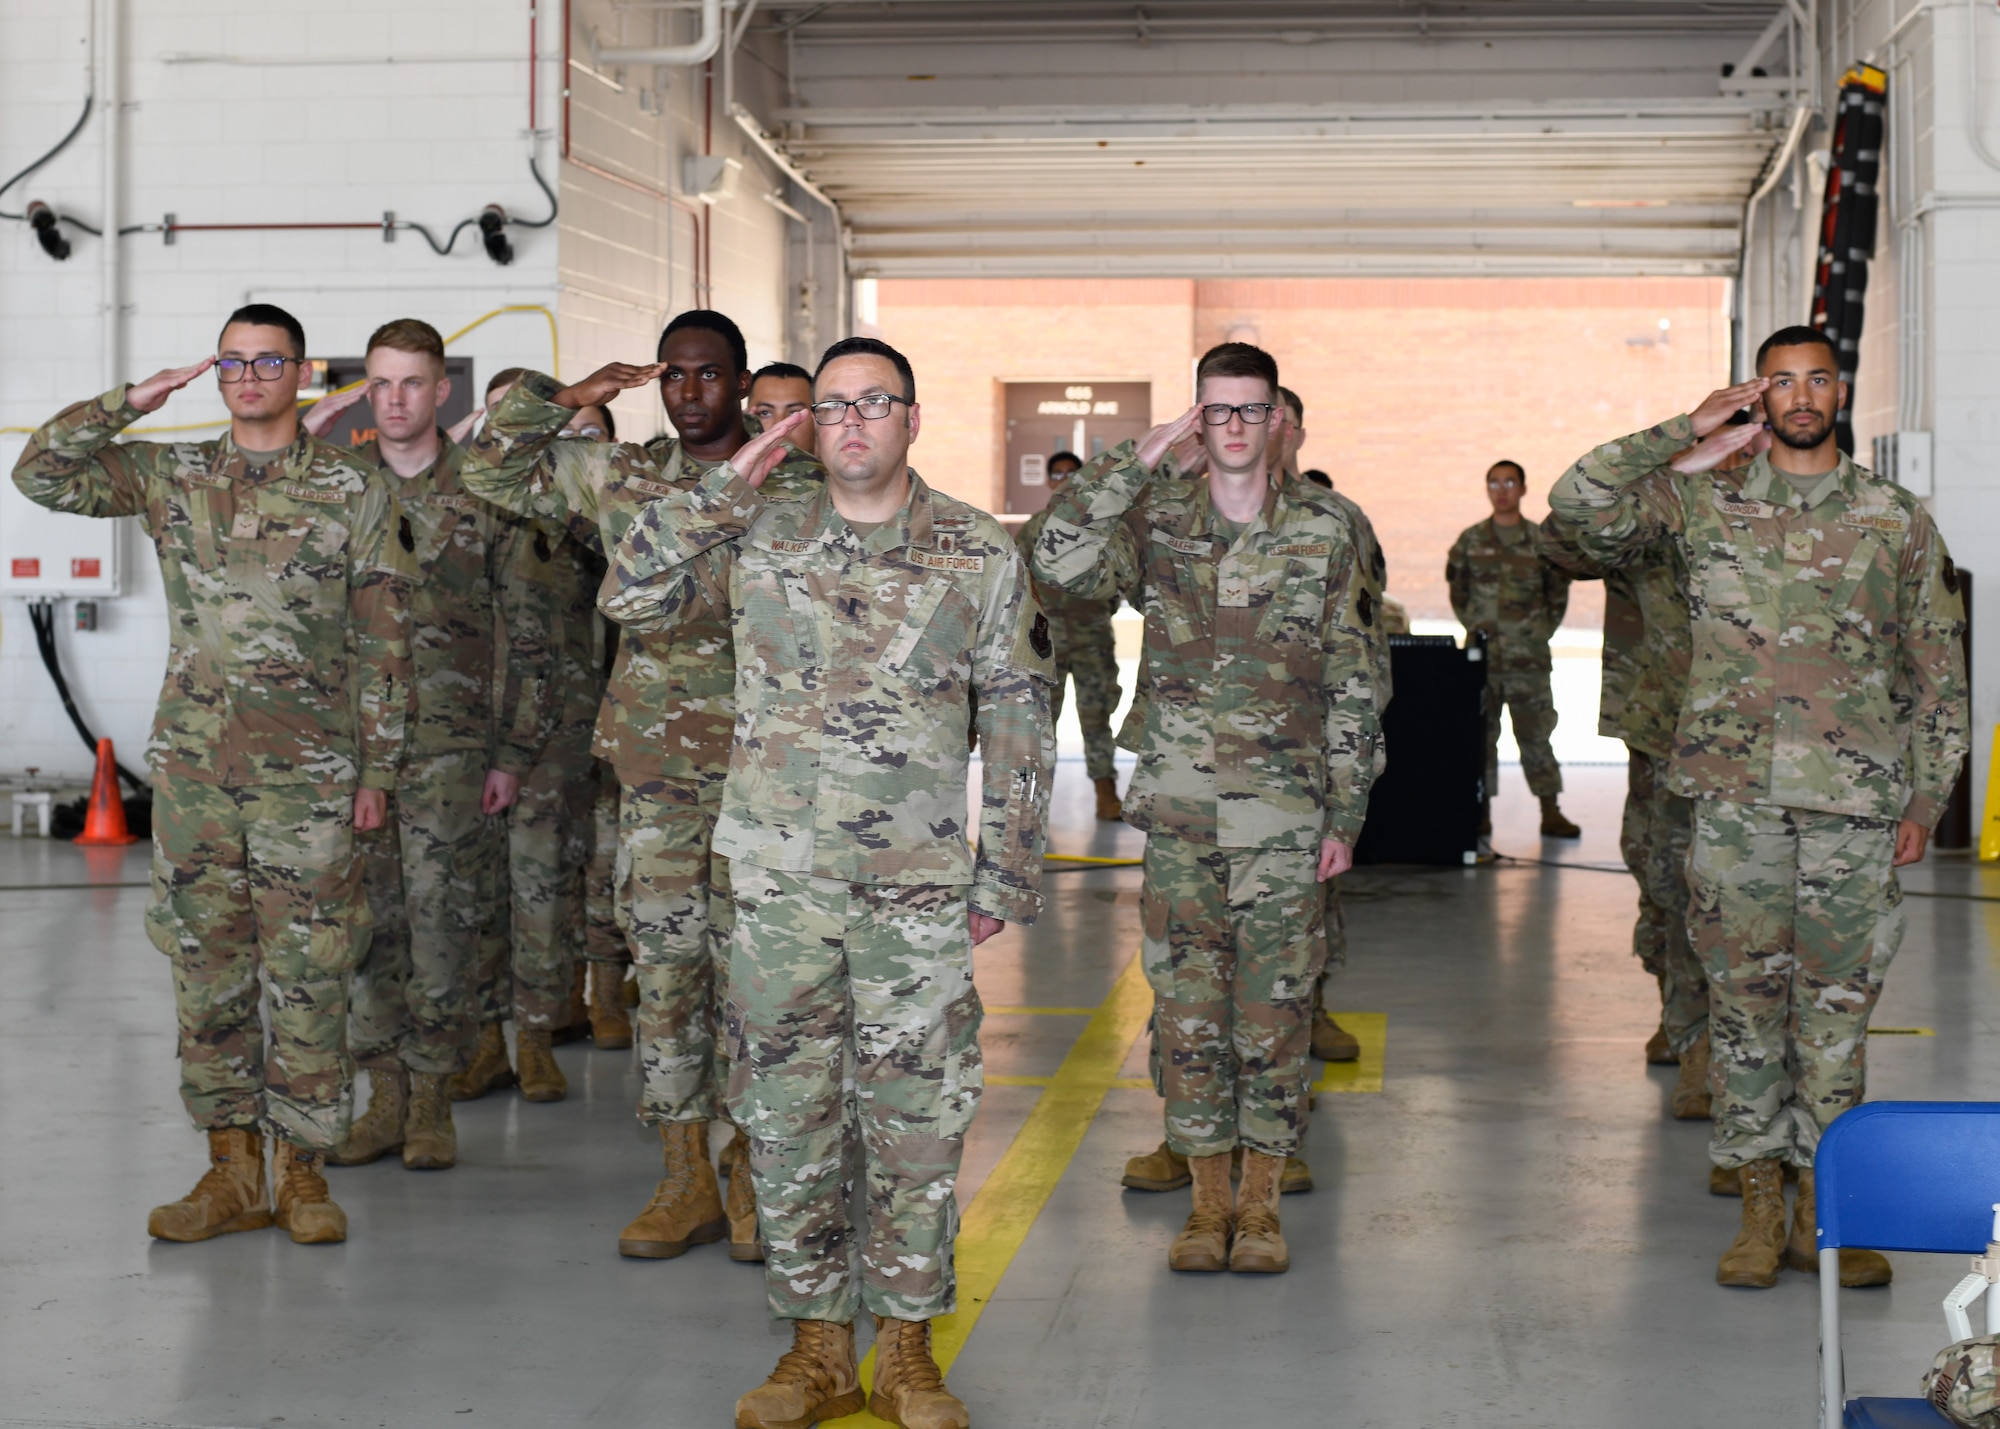 Airmen with the 509th Communications Squadron stand in formation and salute.